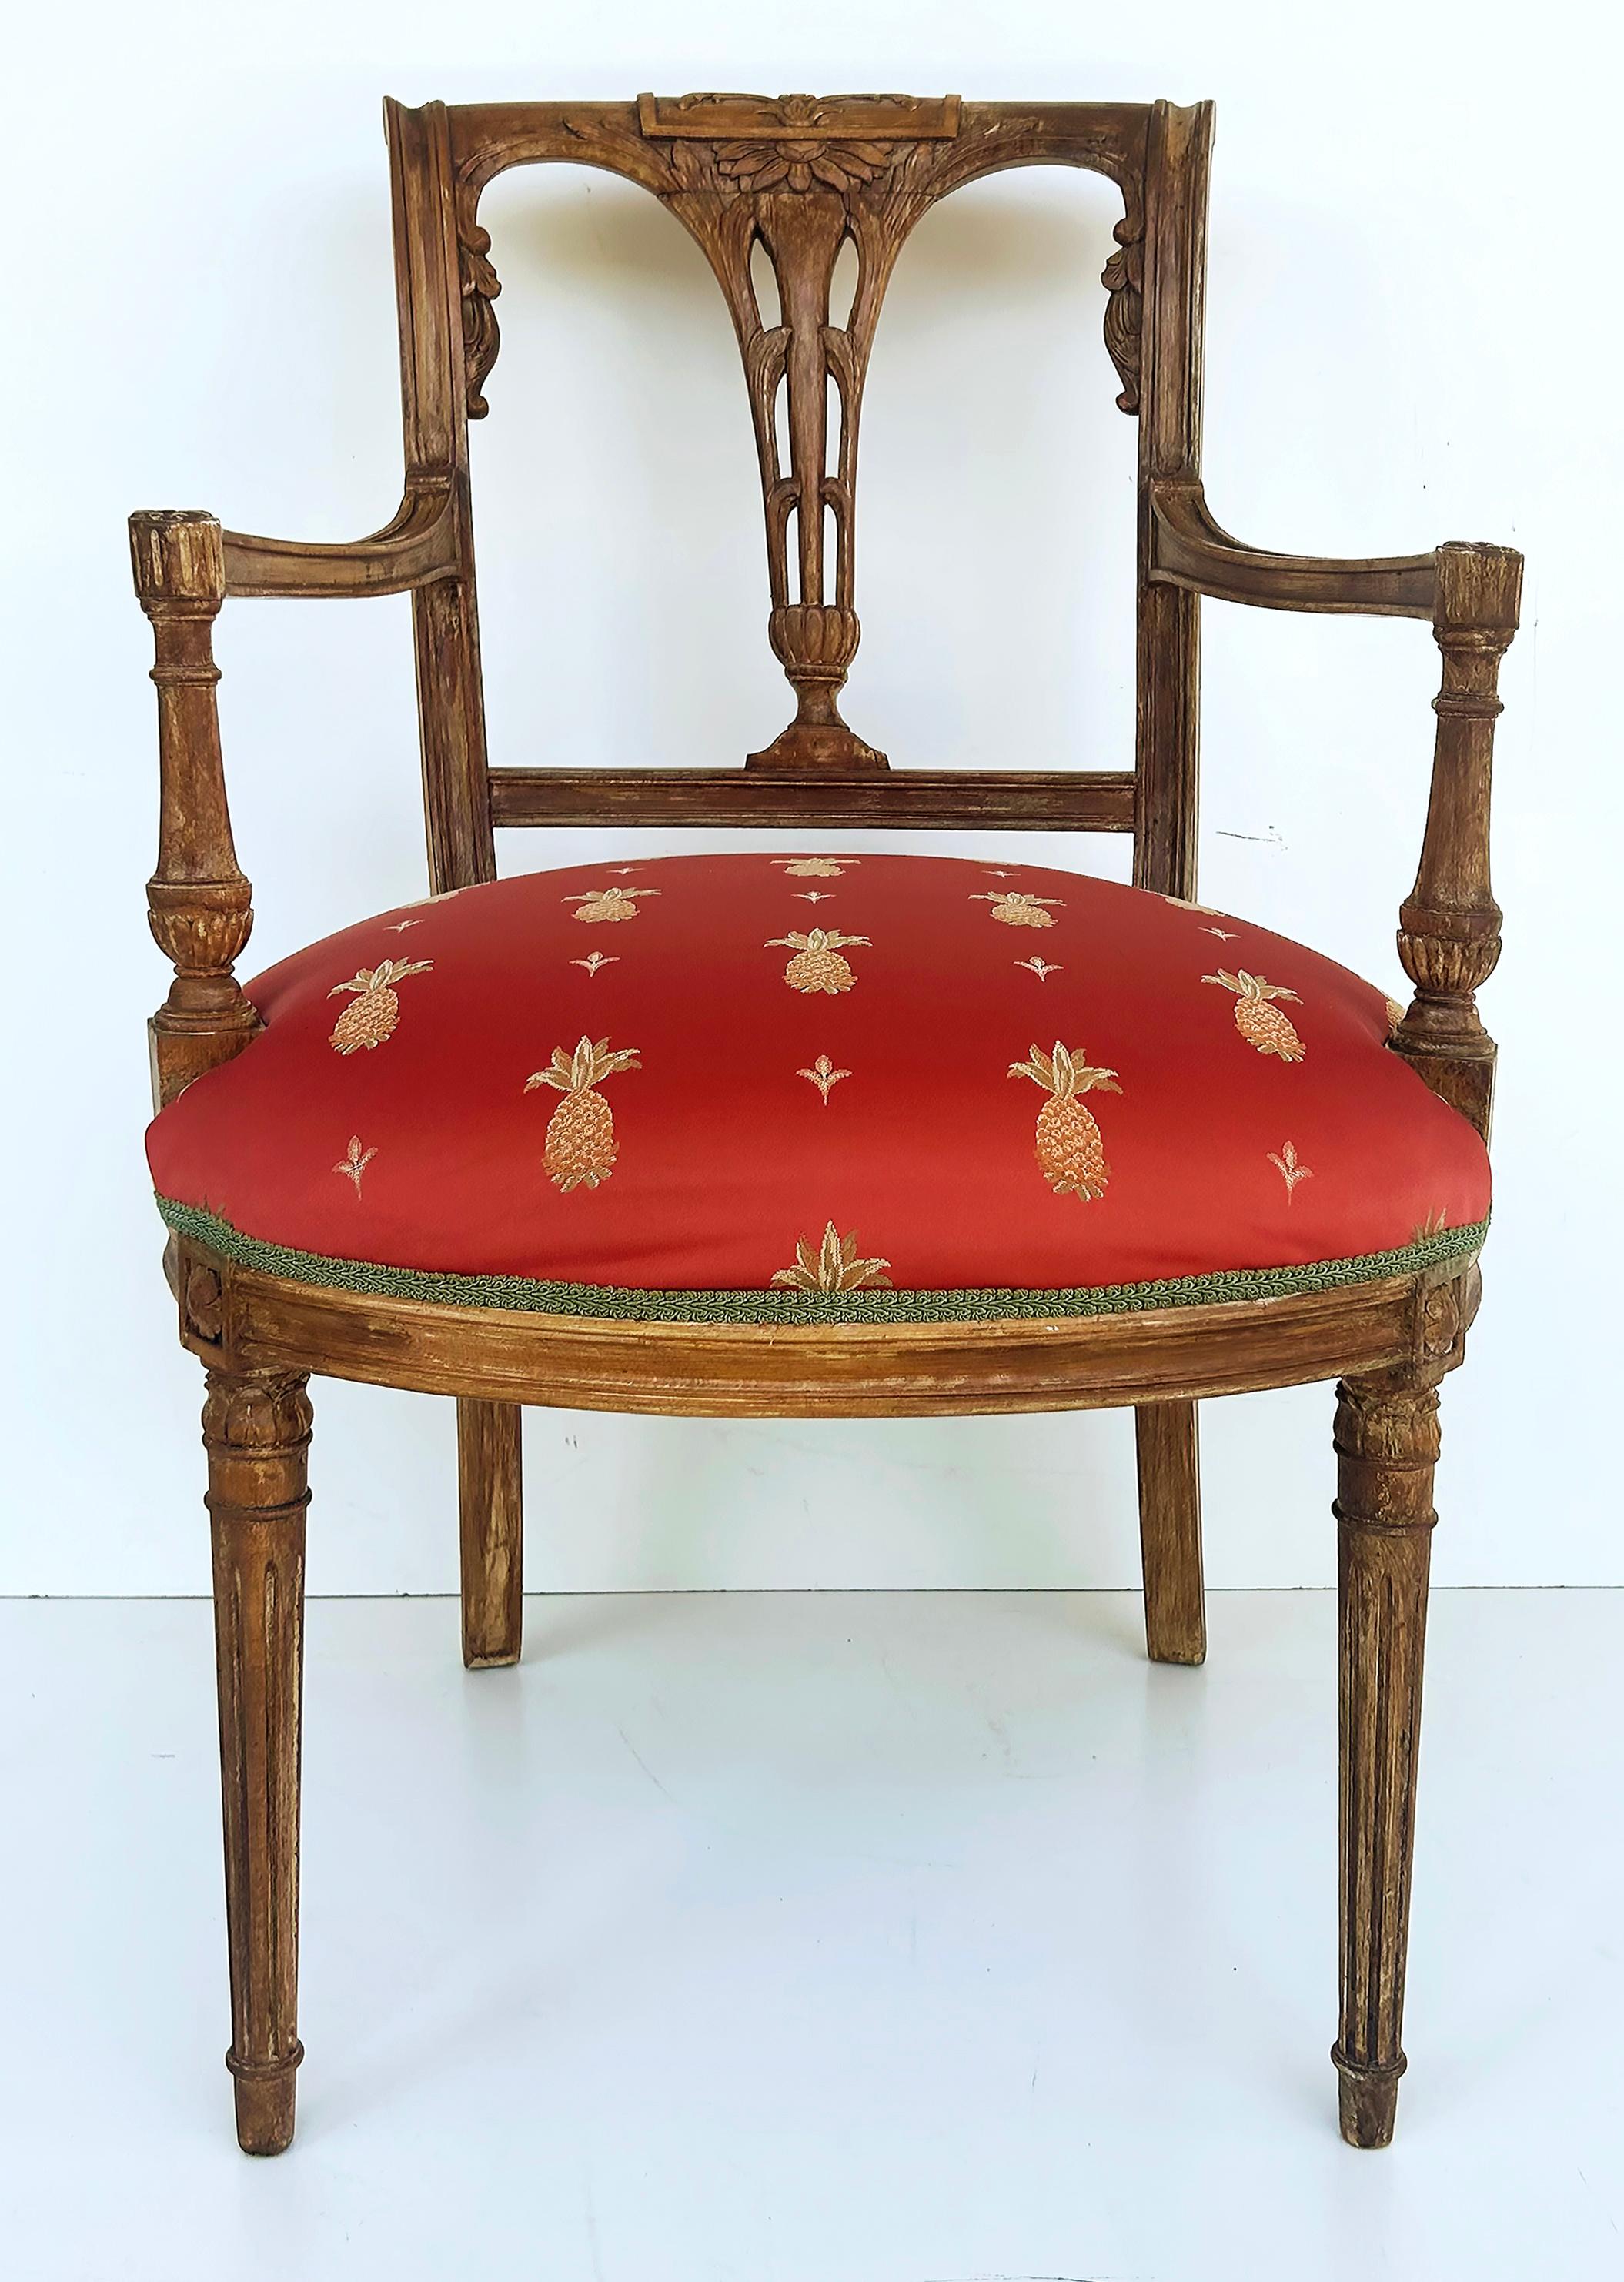 Antique Carved Venetian Plastered Wood Armchairs with Pineapple Seats

Offered for sale is a pair of early 20th-century carved wood armchairs with custom Venetian plaster finishes that give them a wonderful Old World look. The chair seats have been